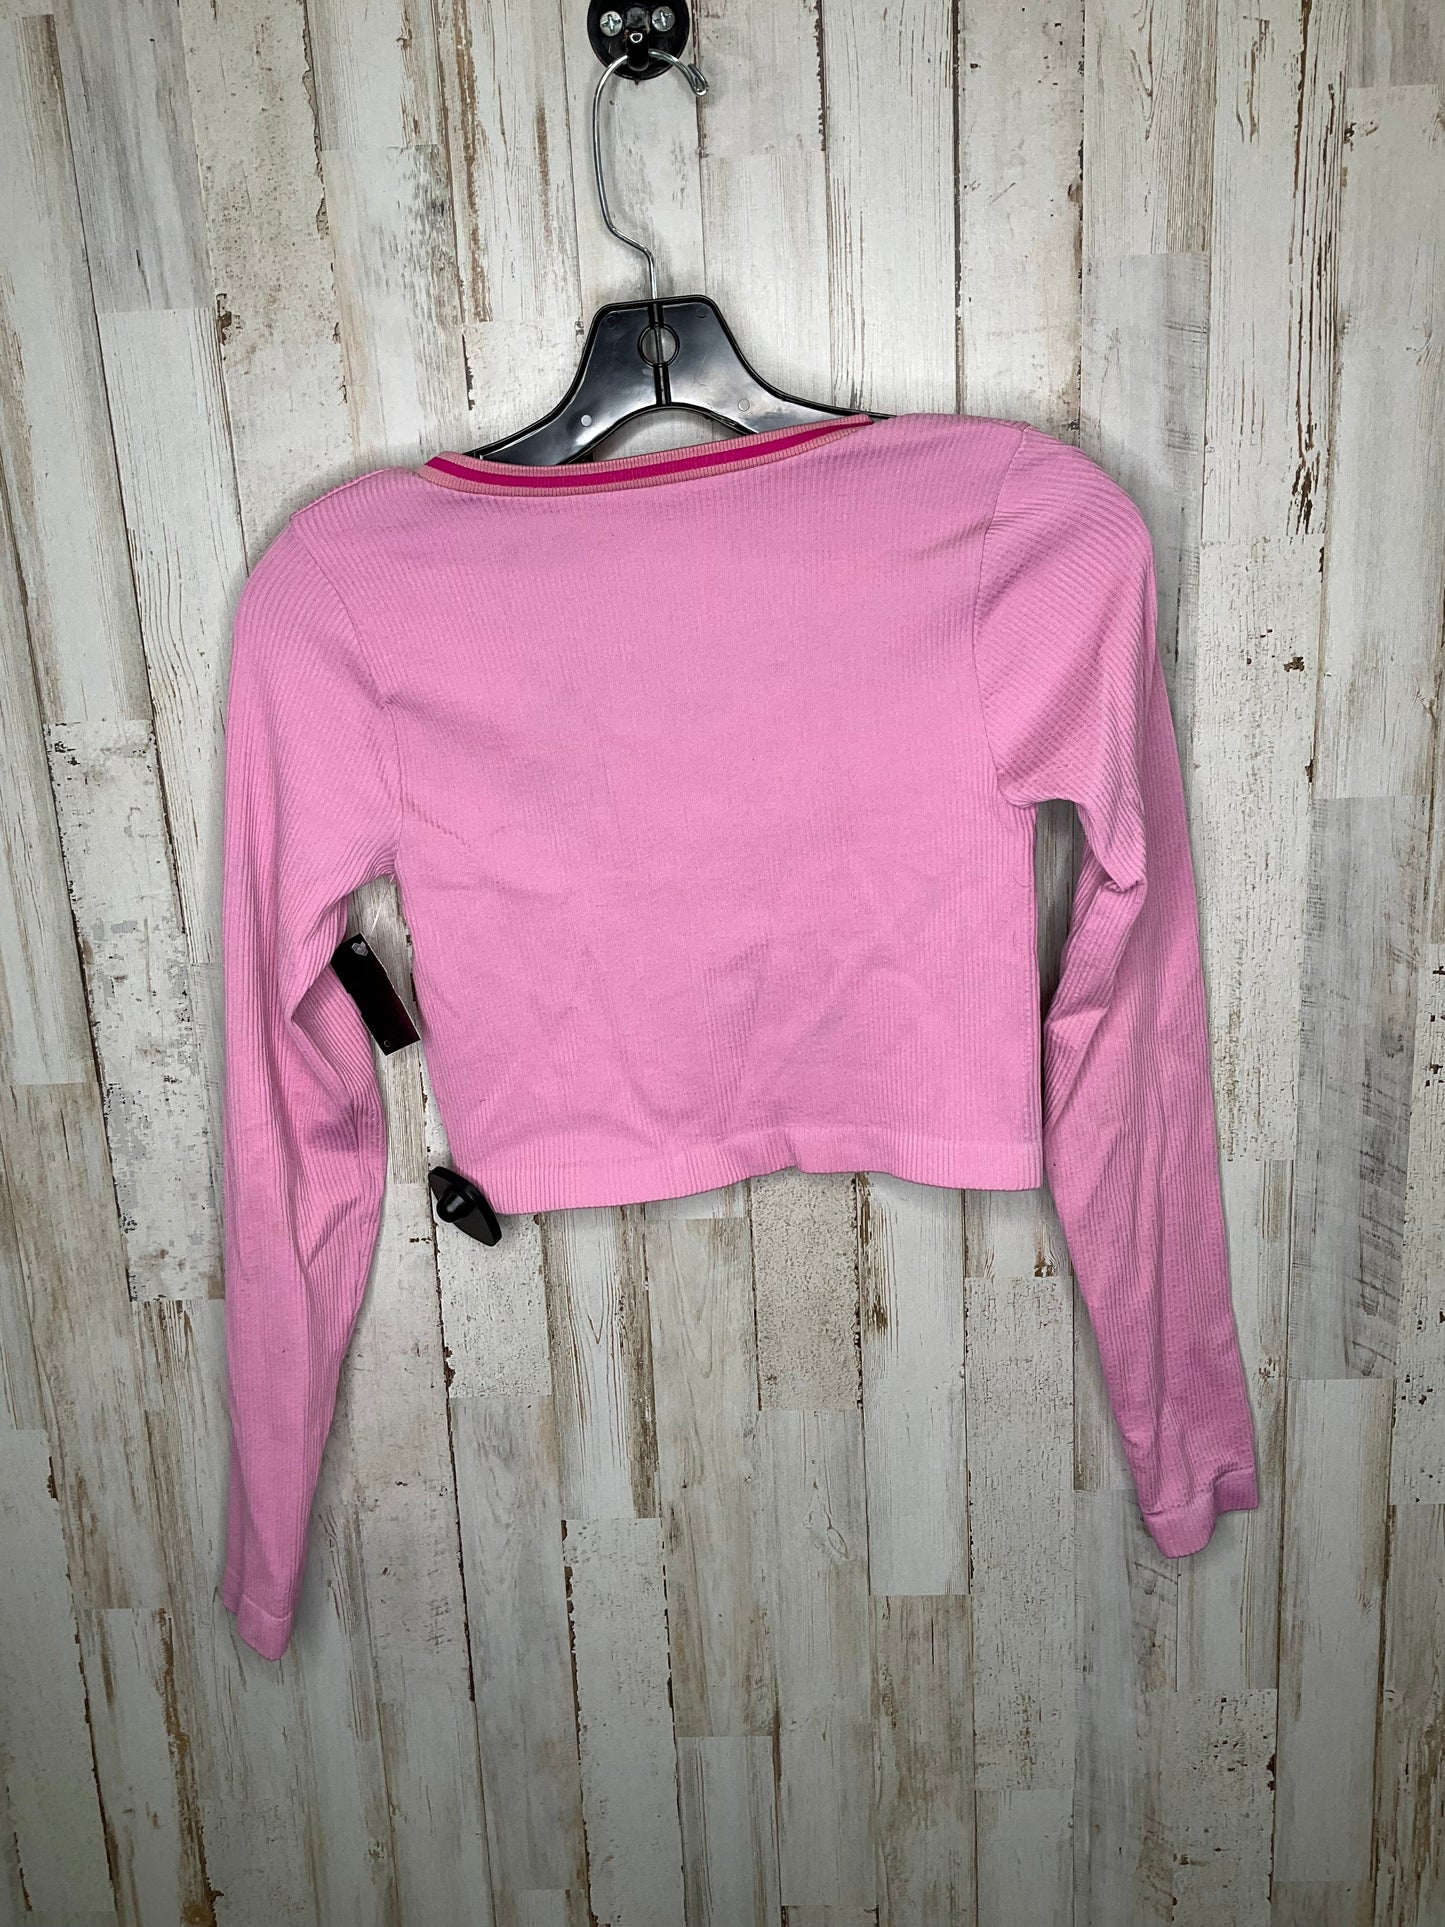 Pink Top Long Sleeve Urban Outfitters